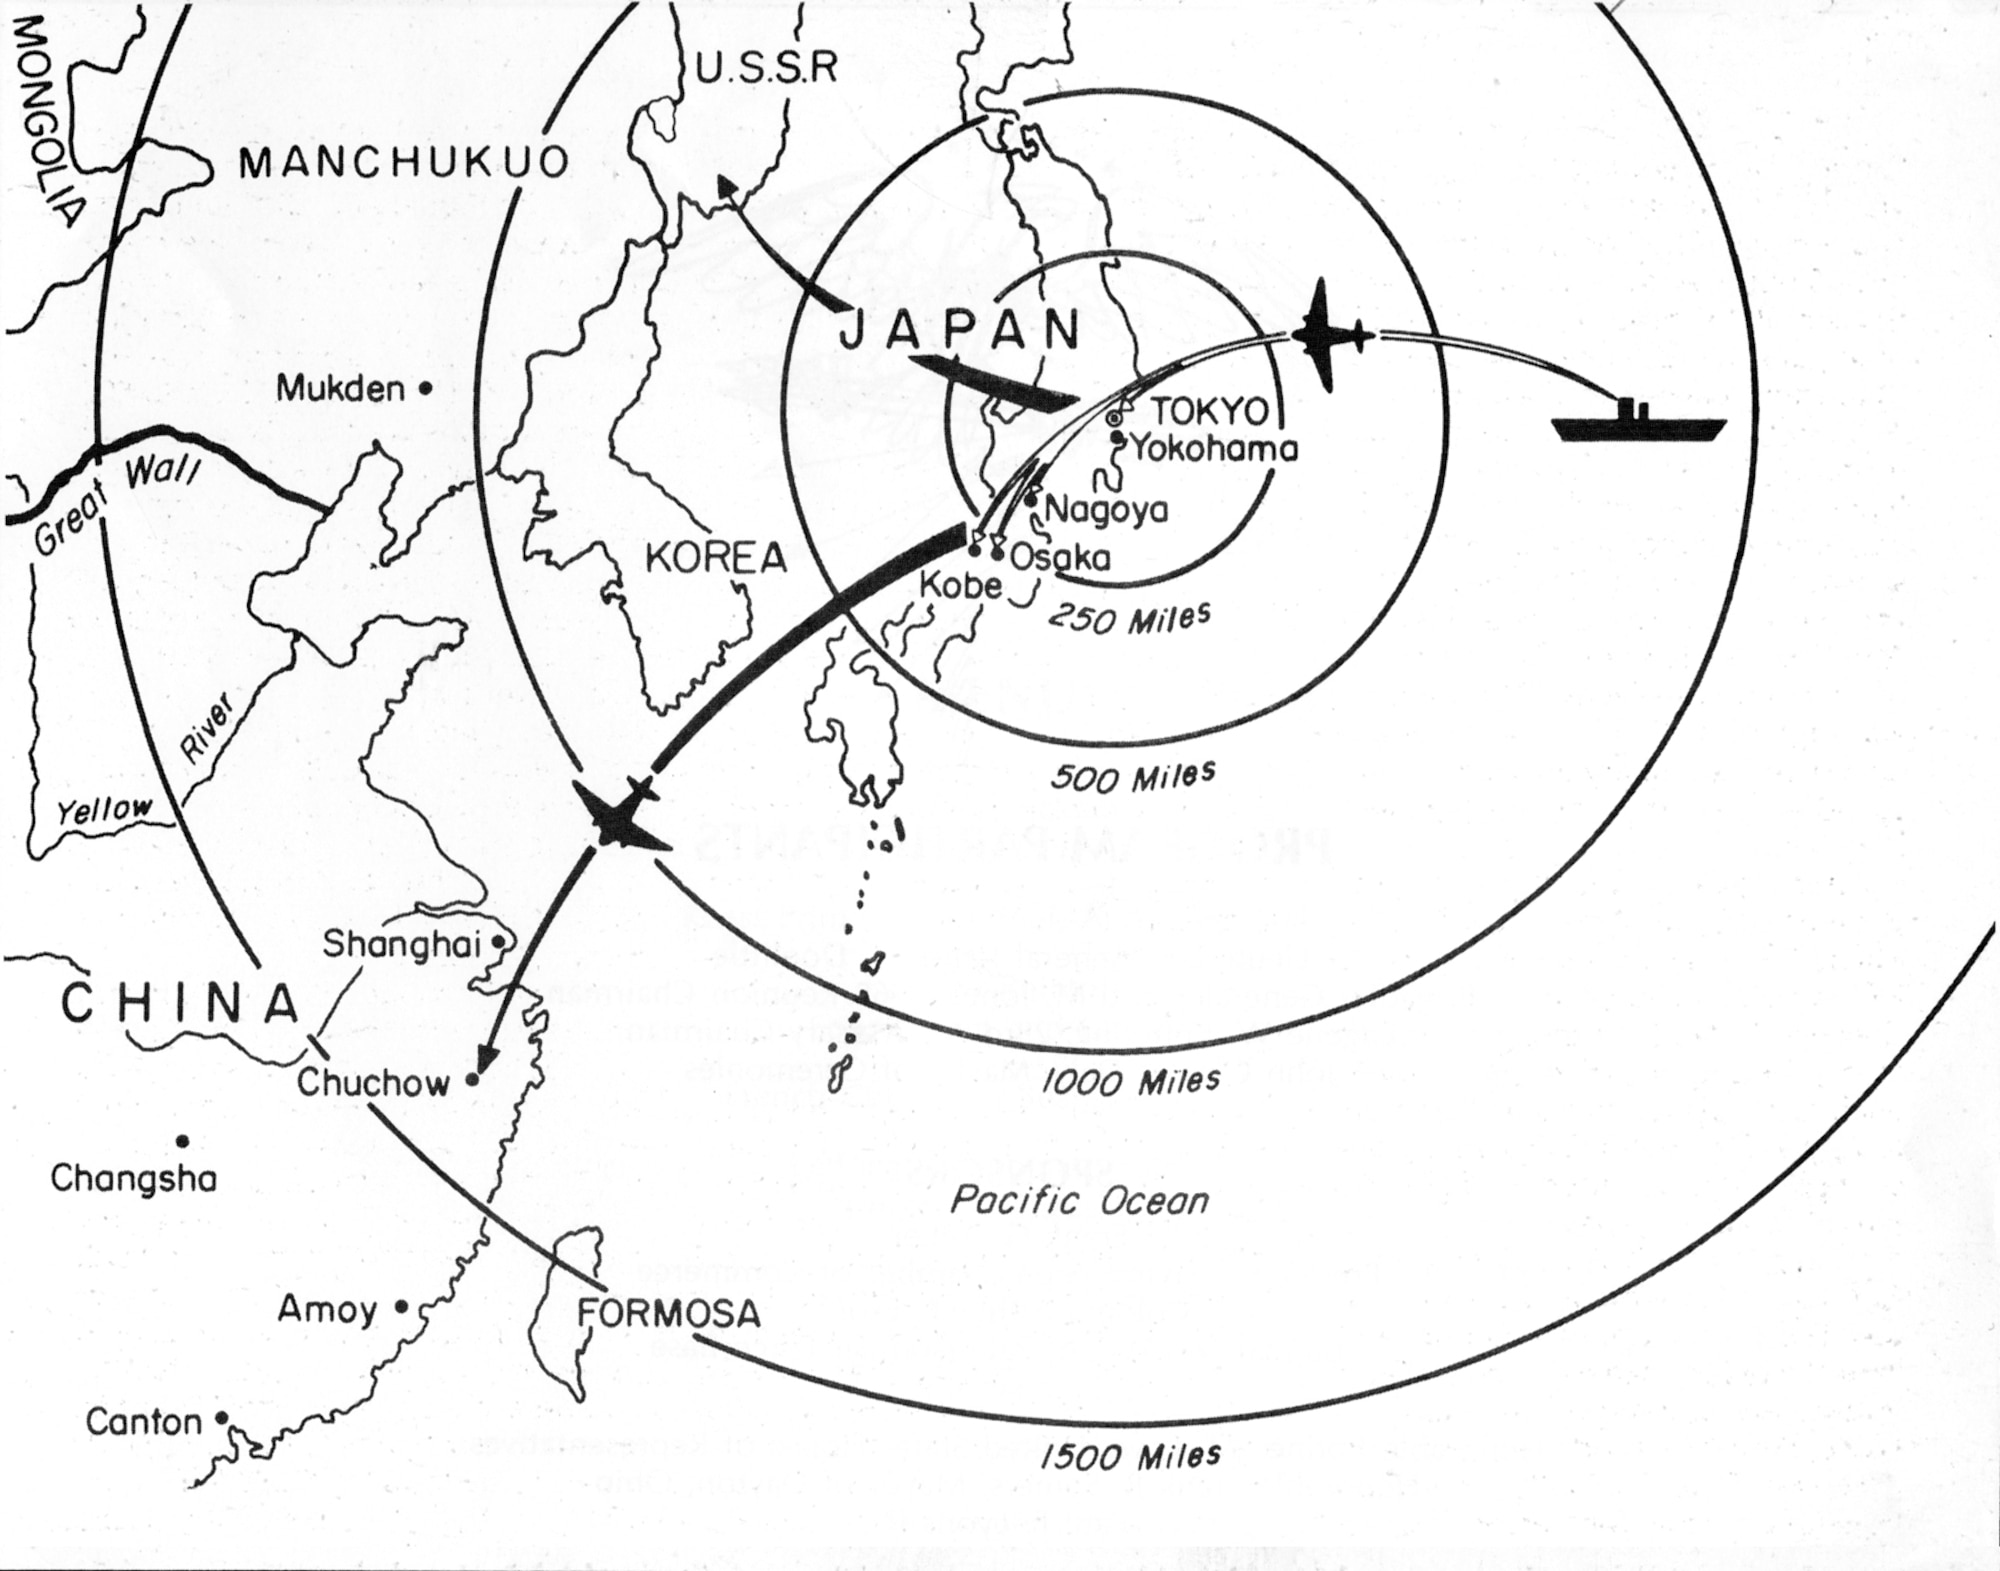 Map showing Doolittle Raid targets and landing fields.